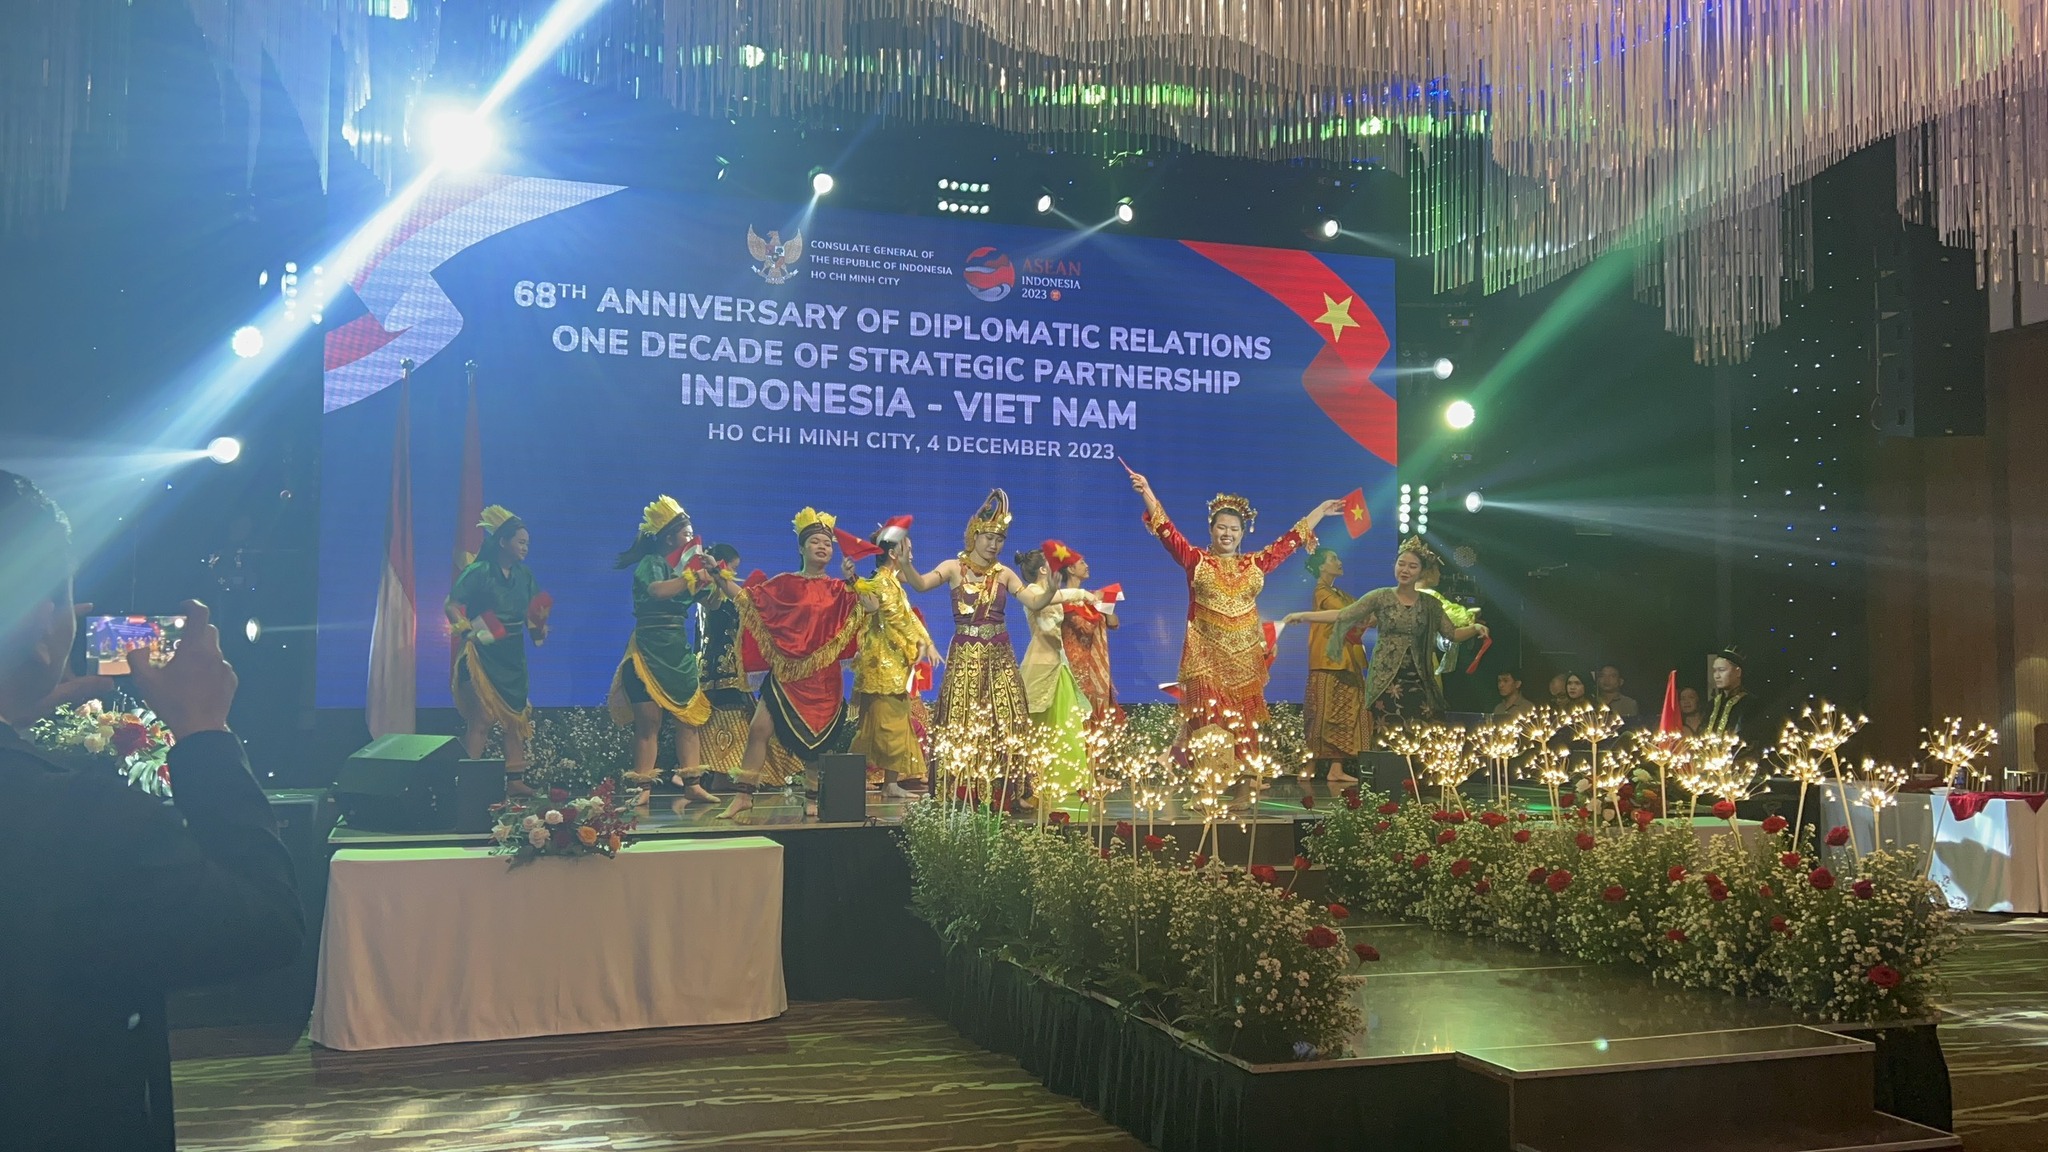 May be an image of 3 people, lighting, dais and text that says '..... 68TH ANNIVERSARY ONE DECADE DIPLOMATIC RELATIONS STRATEGIC PARTNERSHIP M CITY, 4DECEMBER 2023 INDONESIA Ho CHI MINH'